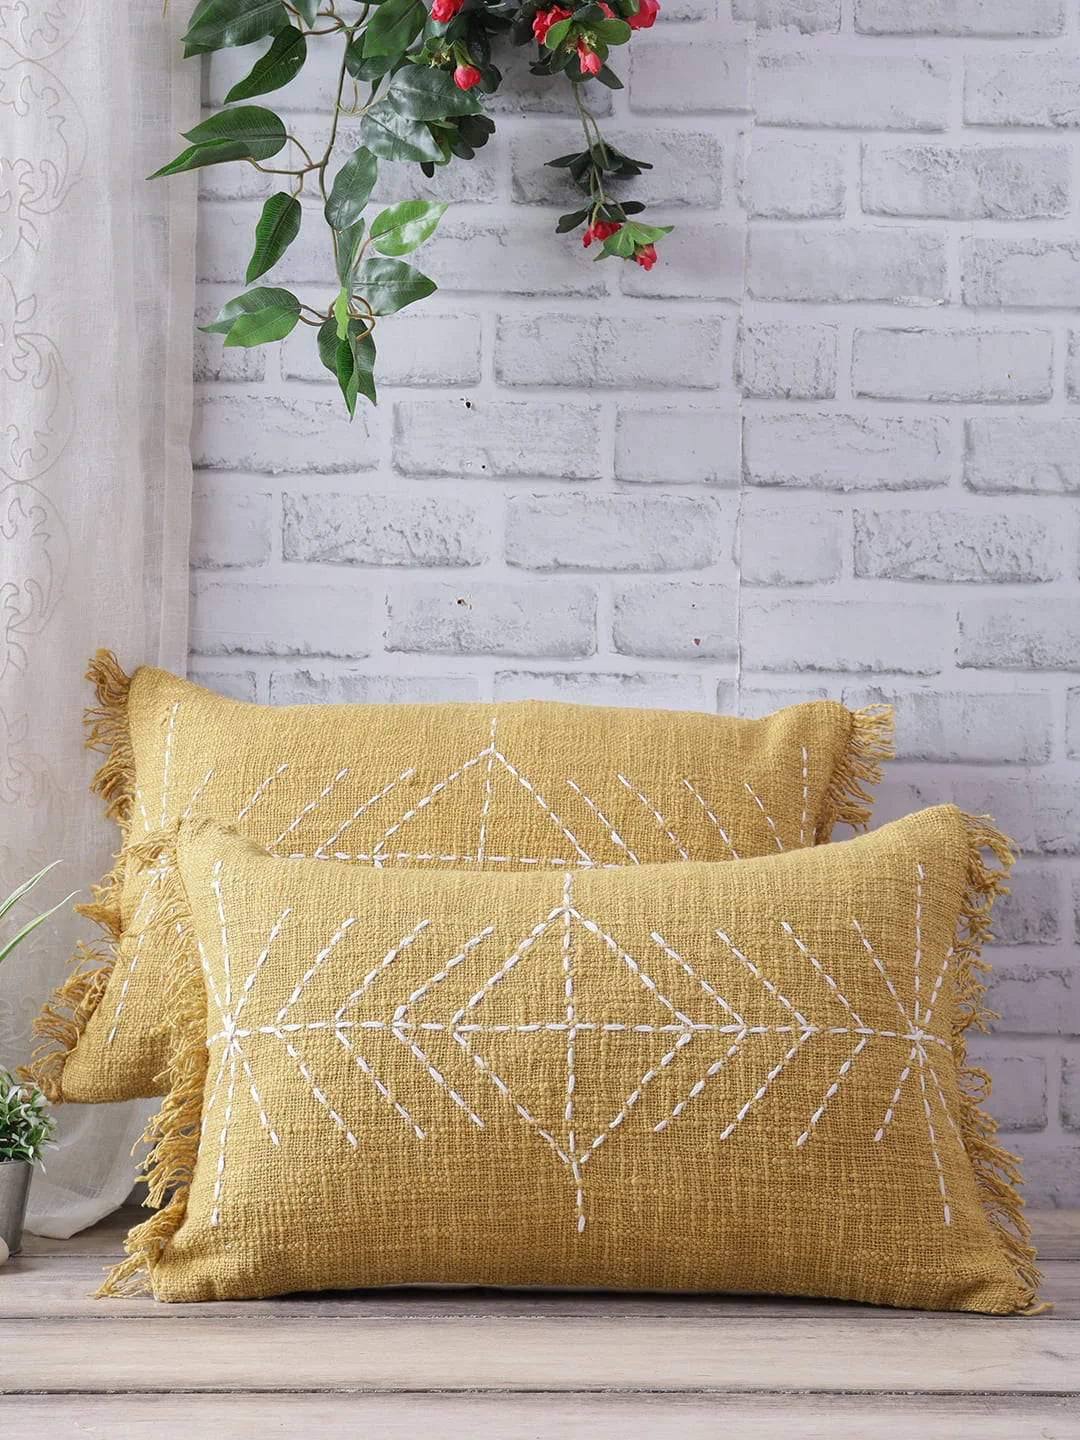 Kantha hand stitched cushion cover with fringes